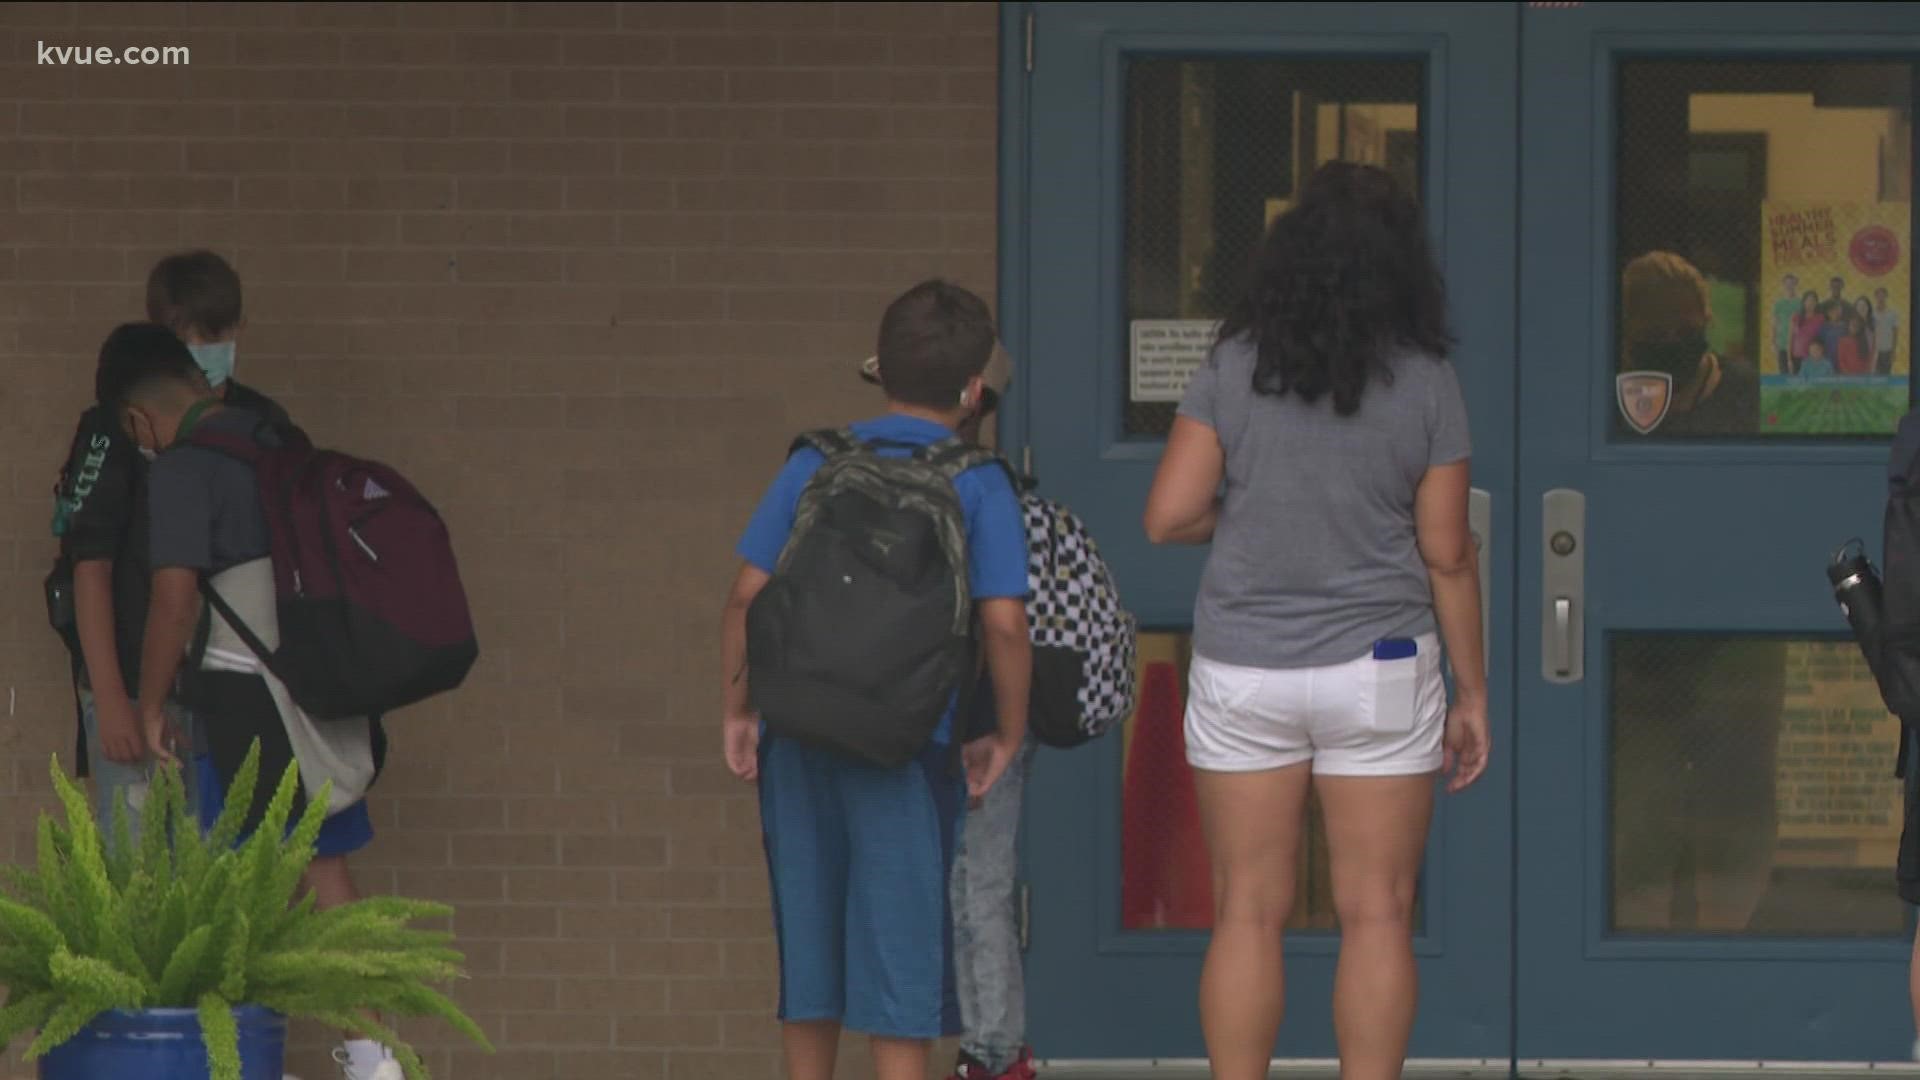 Round Rock ISD issued a temporary mask policy for students.